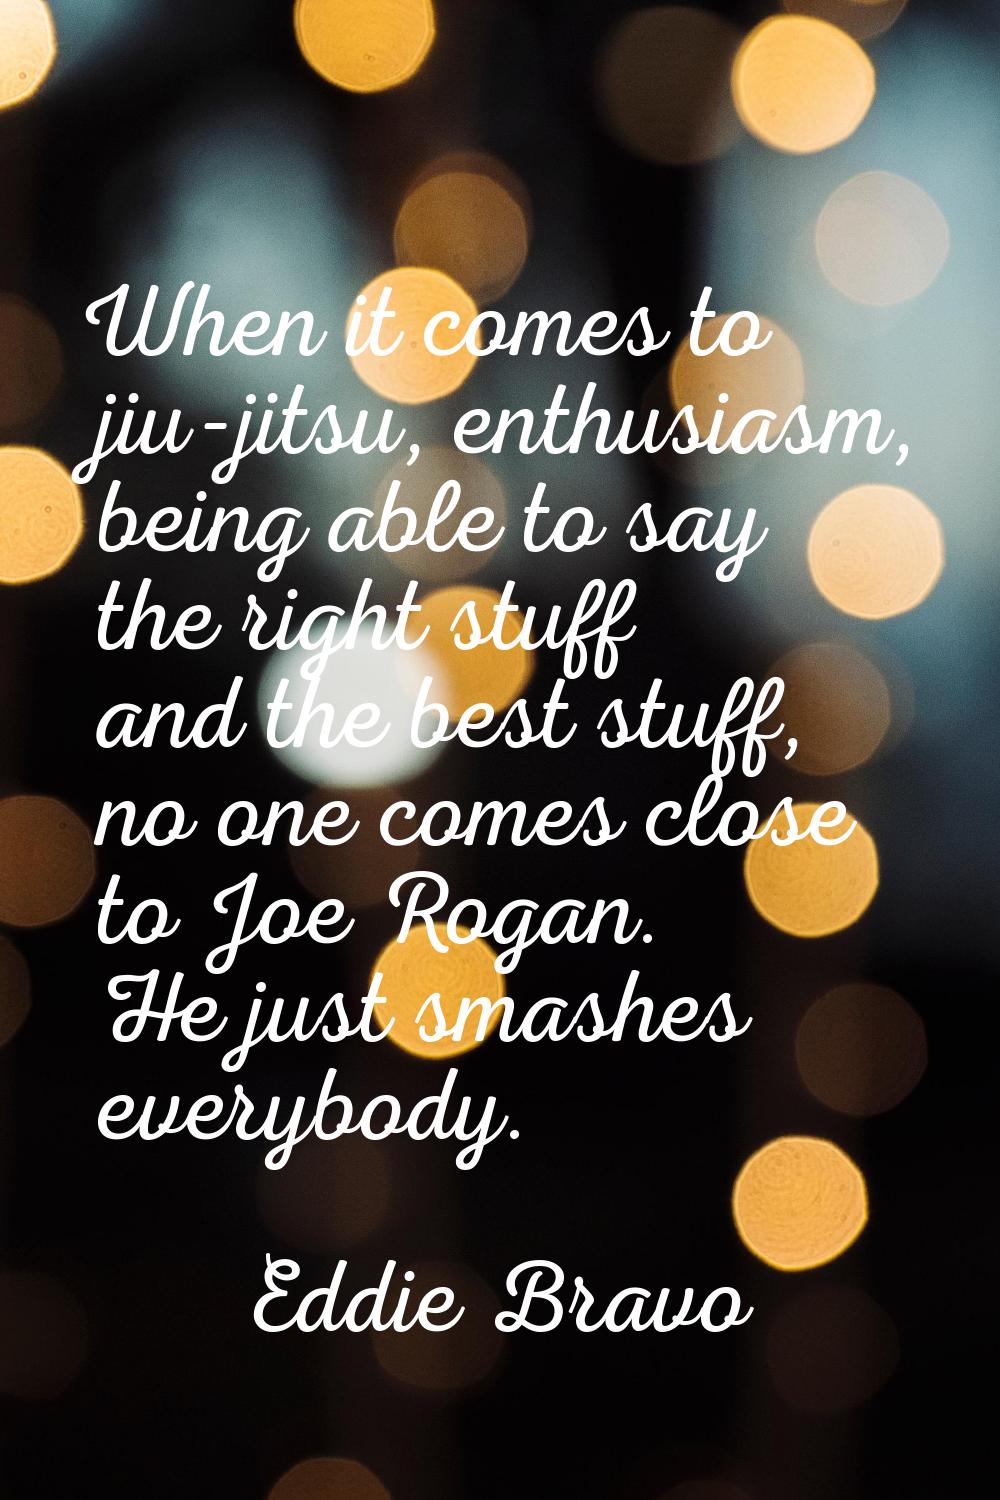 When it comes to jiu-jitsu, enthusiasm, being able to say the right stuff and the best stuff, no on